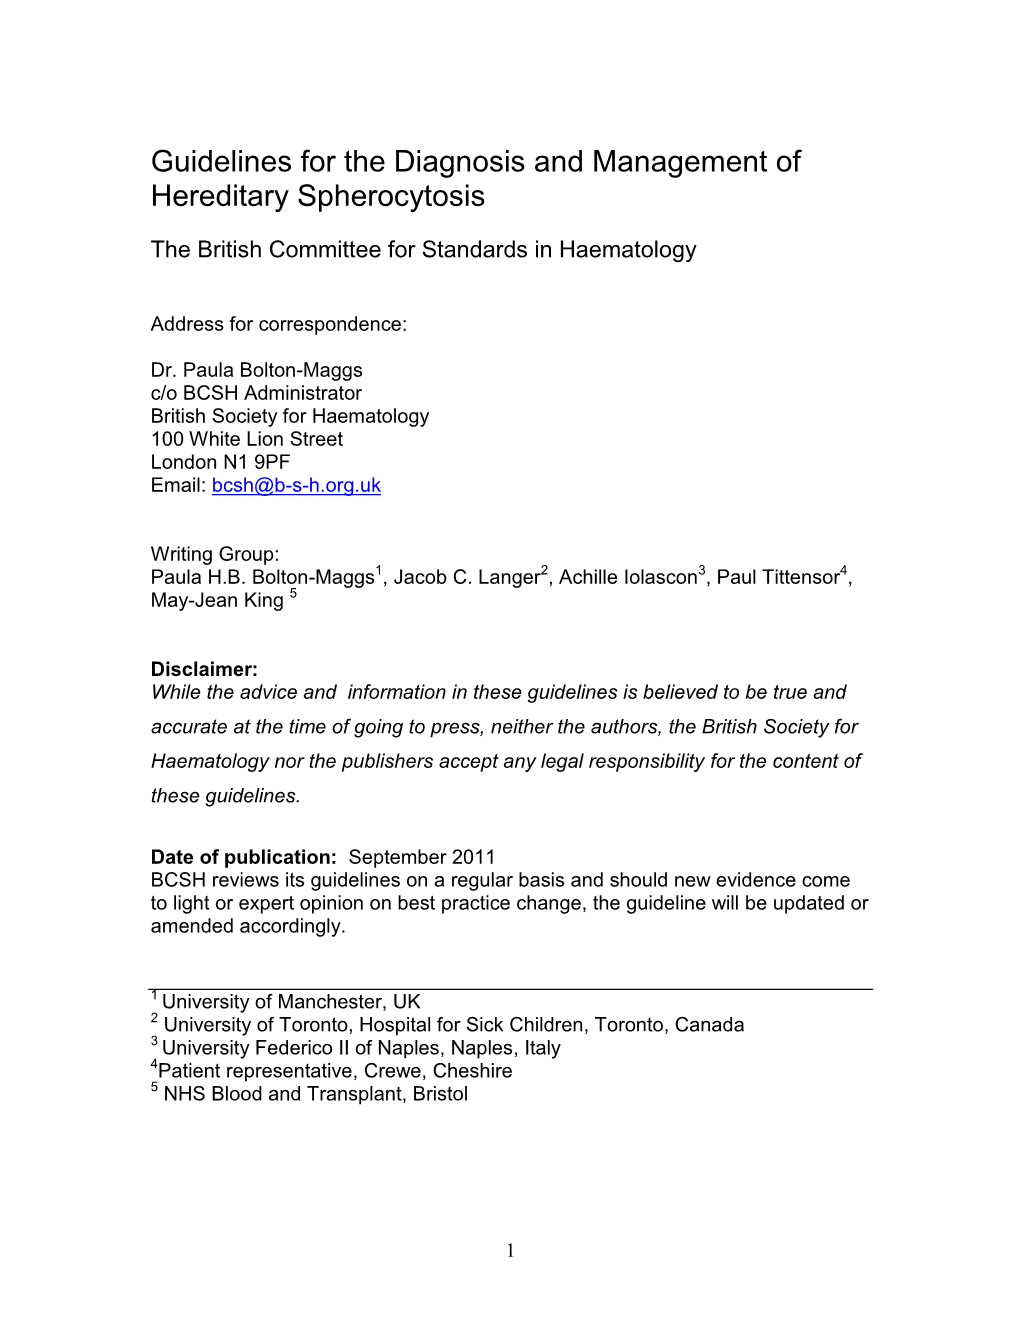 Guidelines for the Diagnosis and Management of Hereditary Spherocytosis